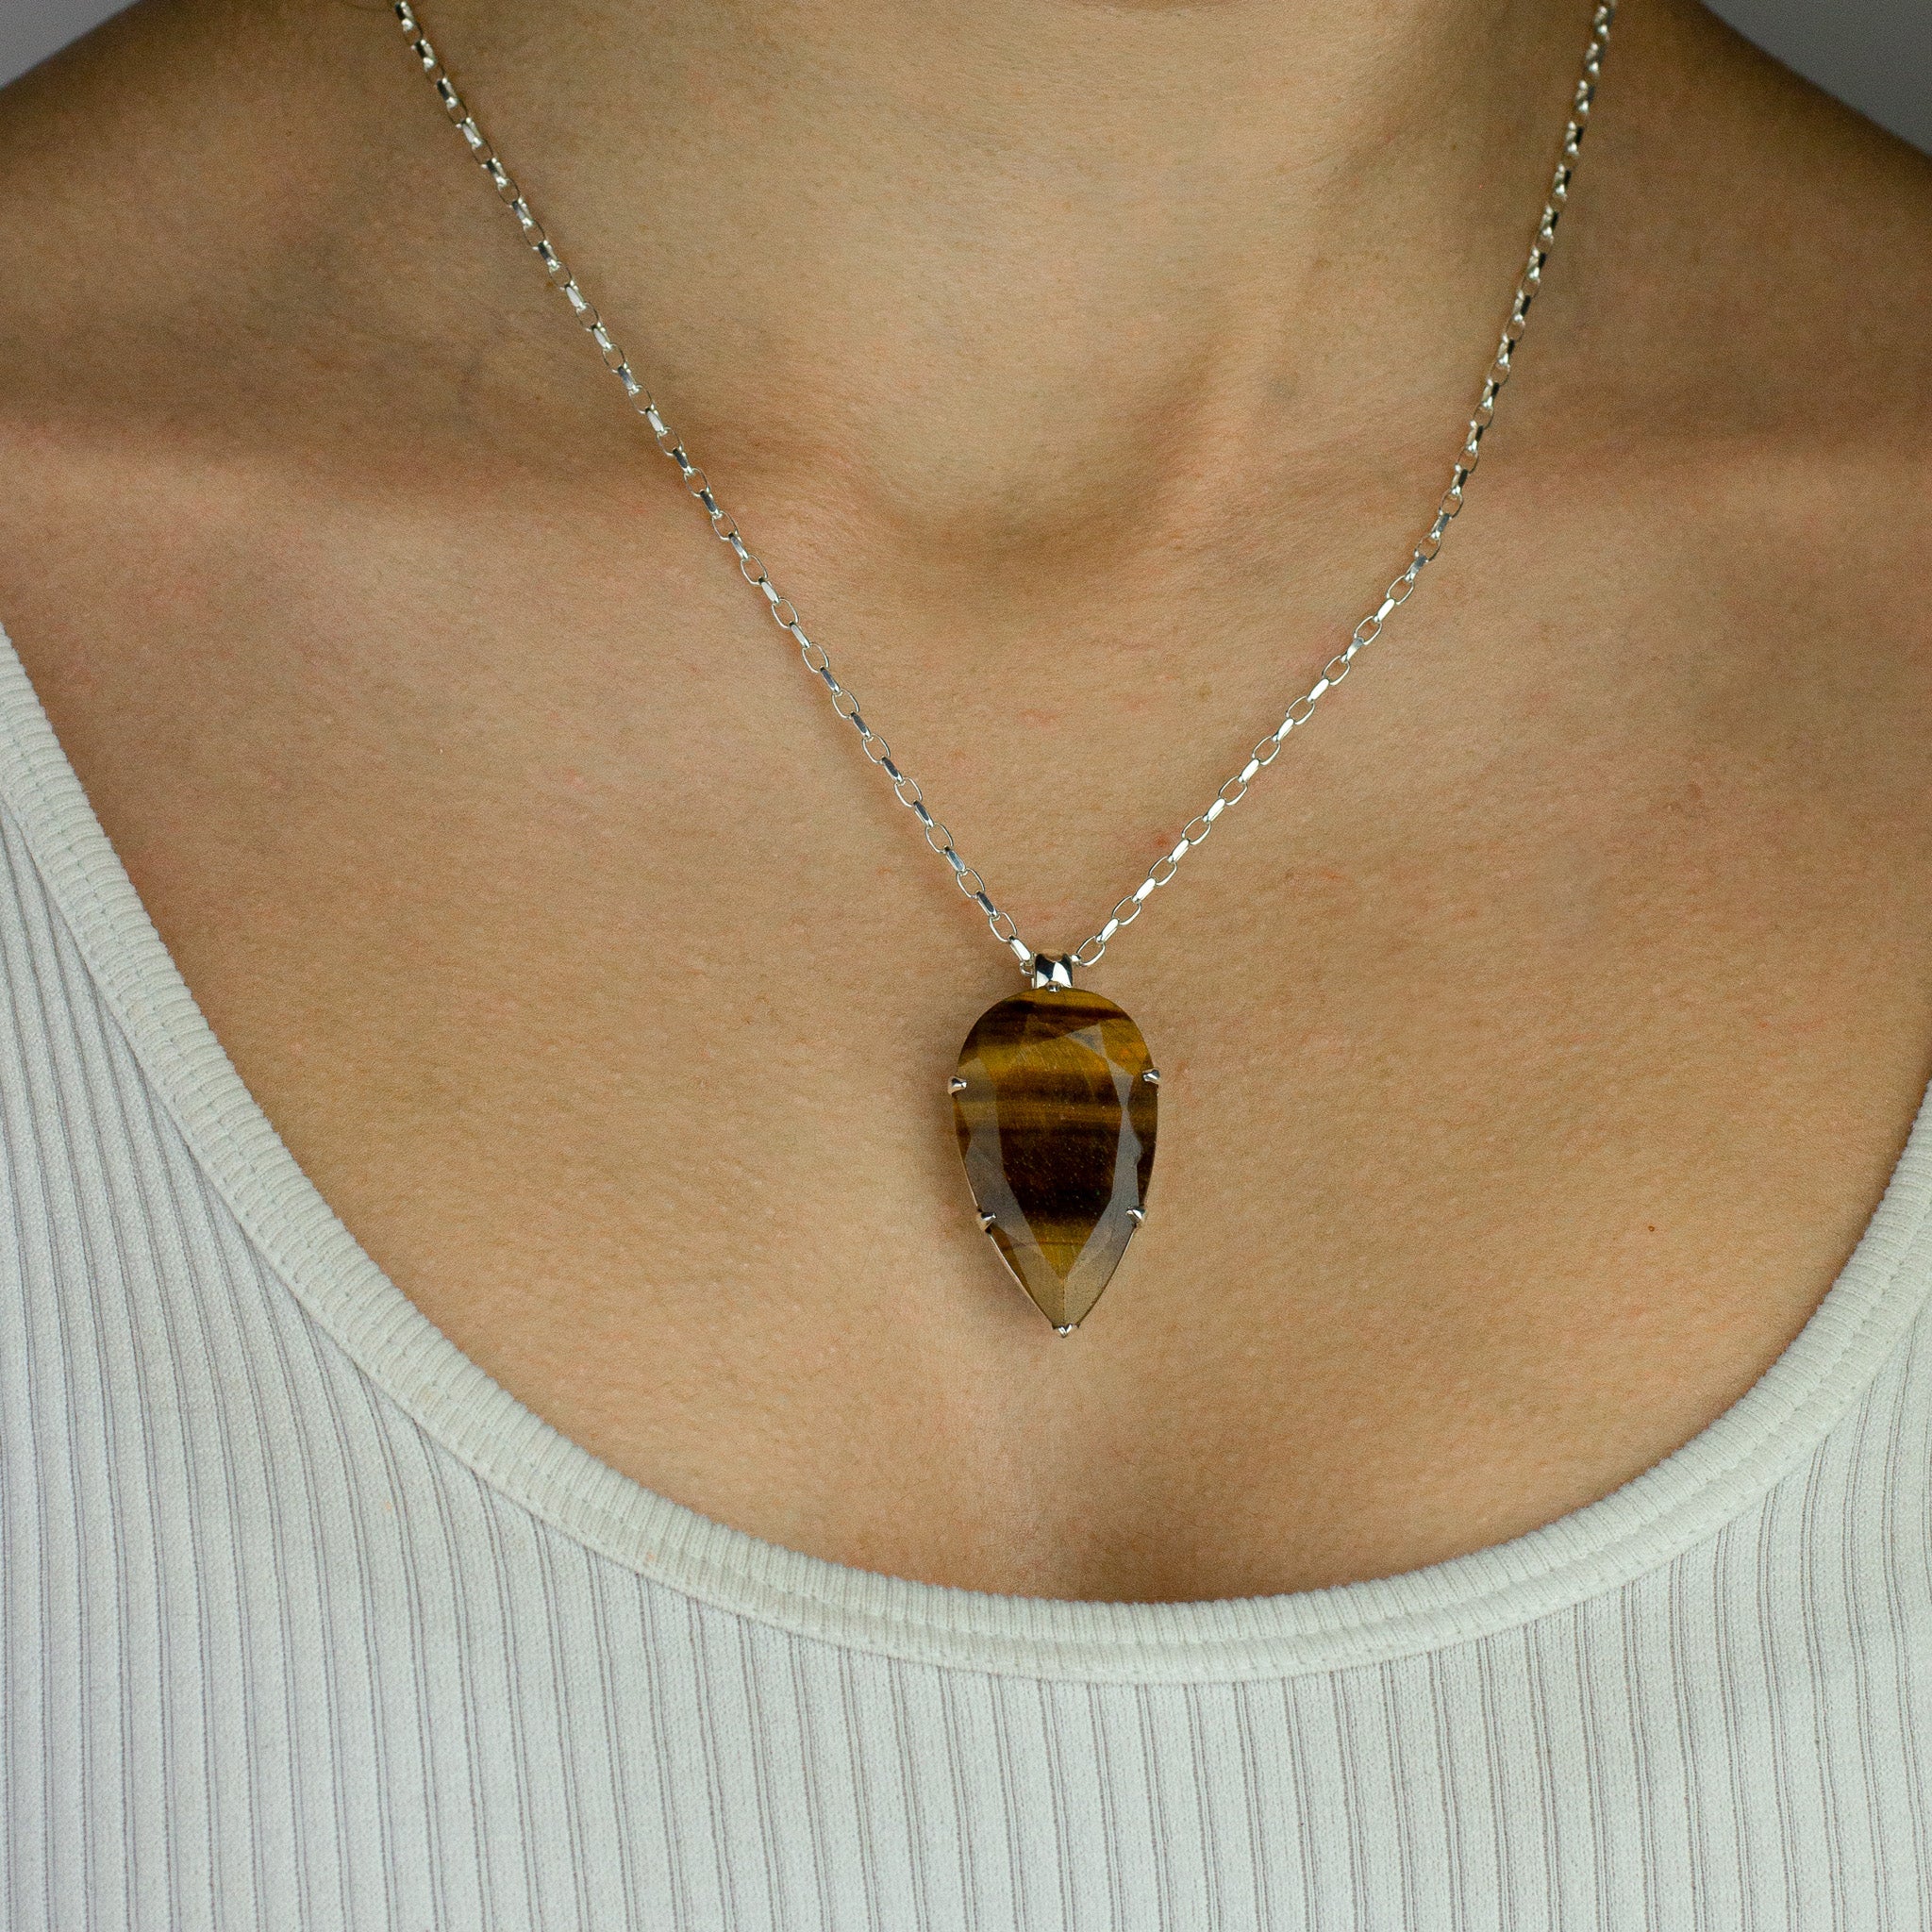 Pearl and Tigers Eye Necklaces| Surat Diamond Jewelry SN903